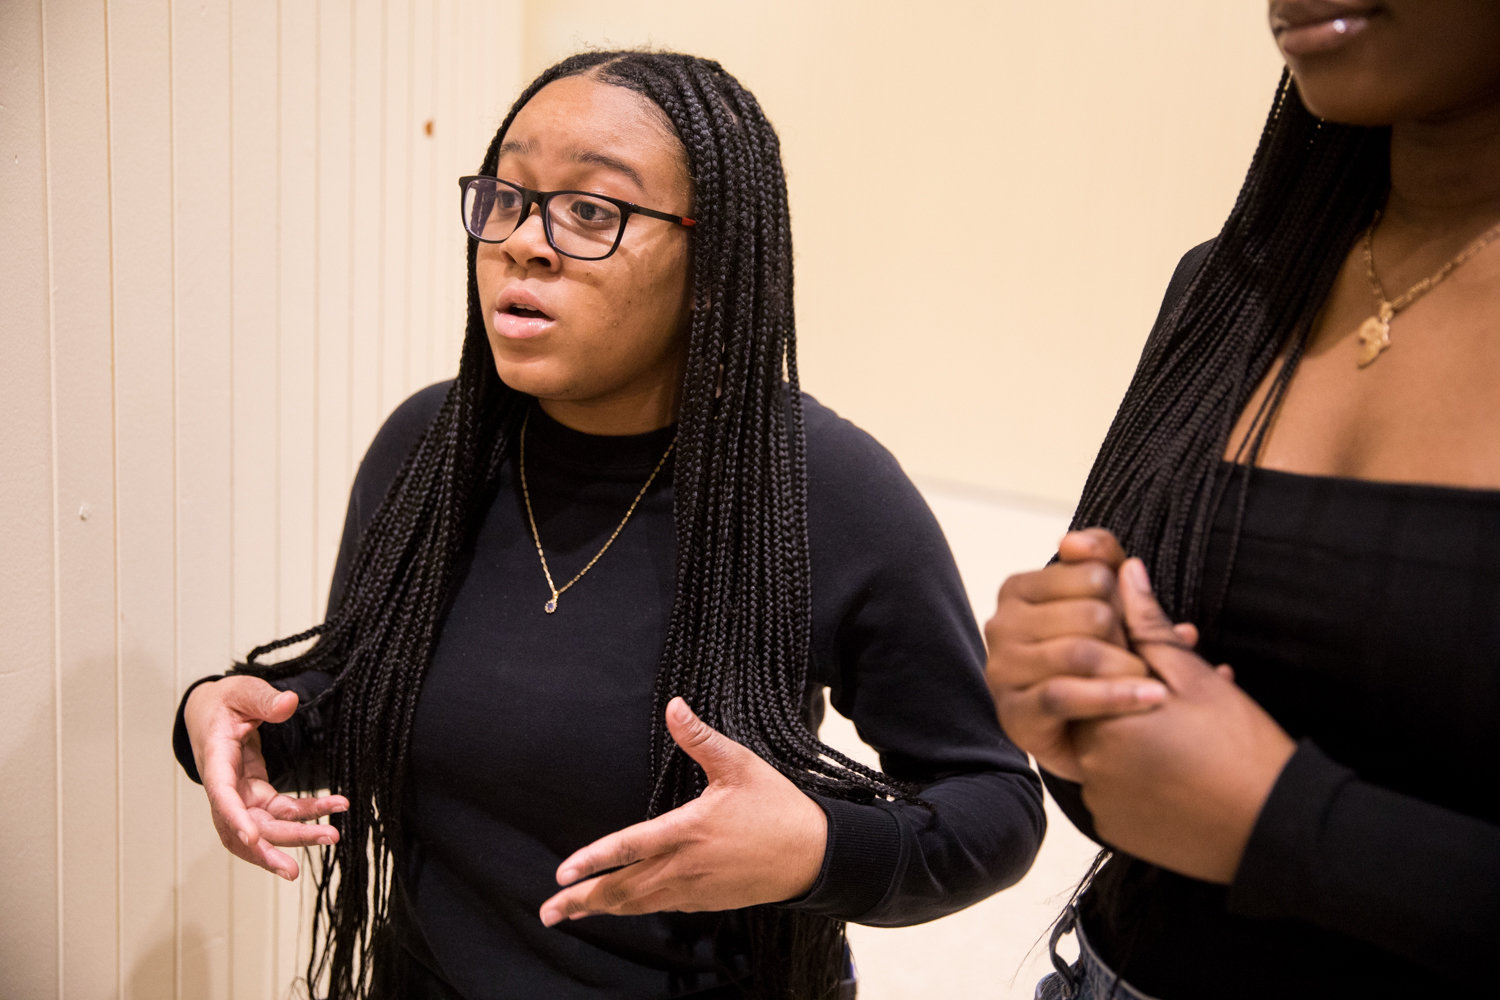 Tamara Wood, a senior at Marble Hill School for International Studies, was inspired by last year’s Black History Show to help found the Black Student Union.